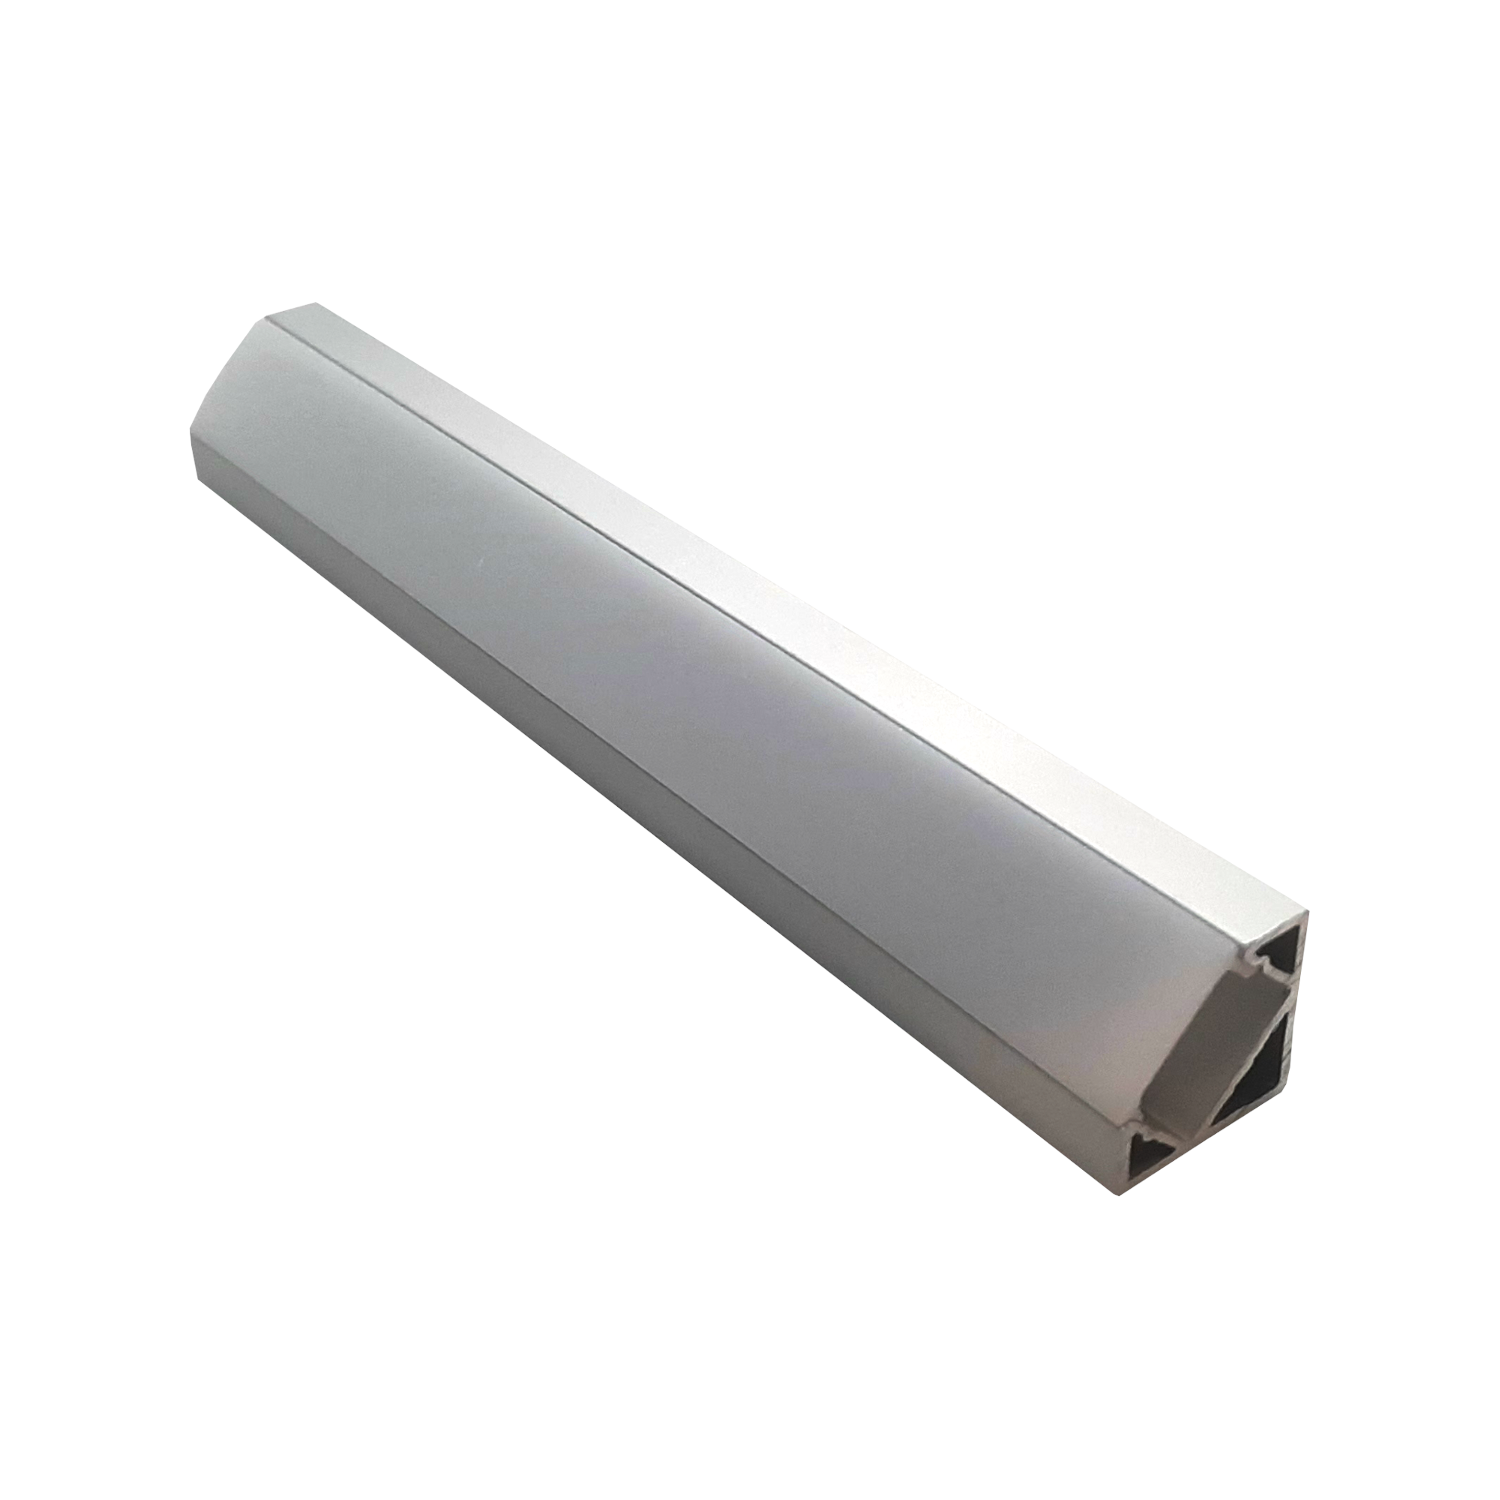 Product image of LXT15 Silver Angled Extrusion for LED Strip